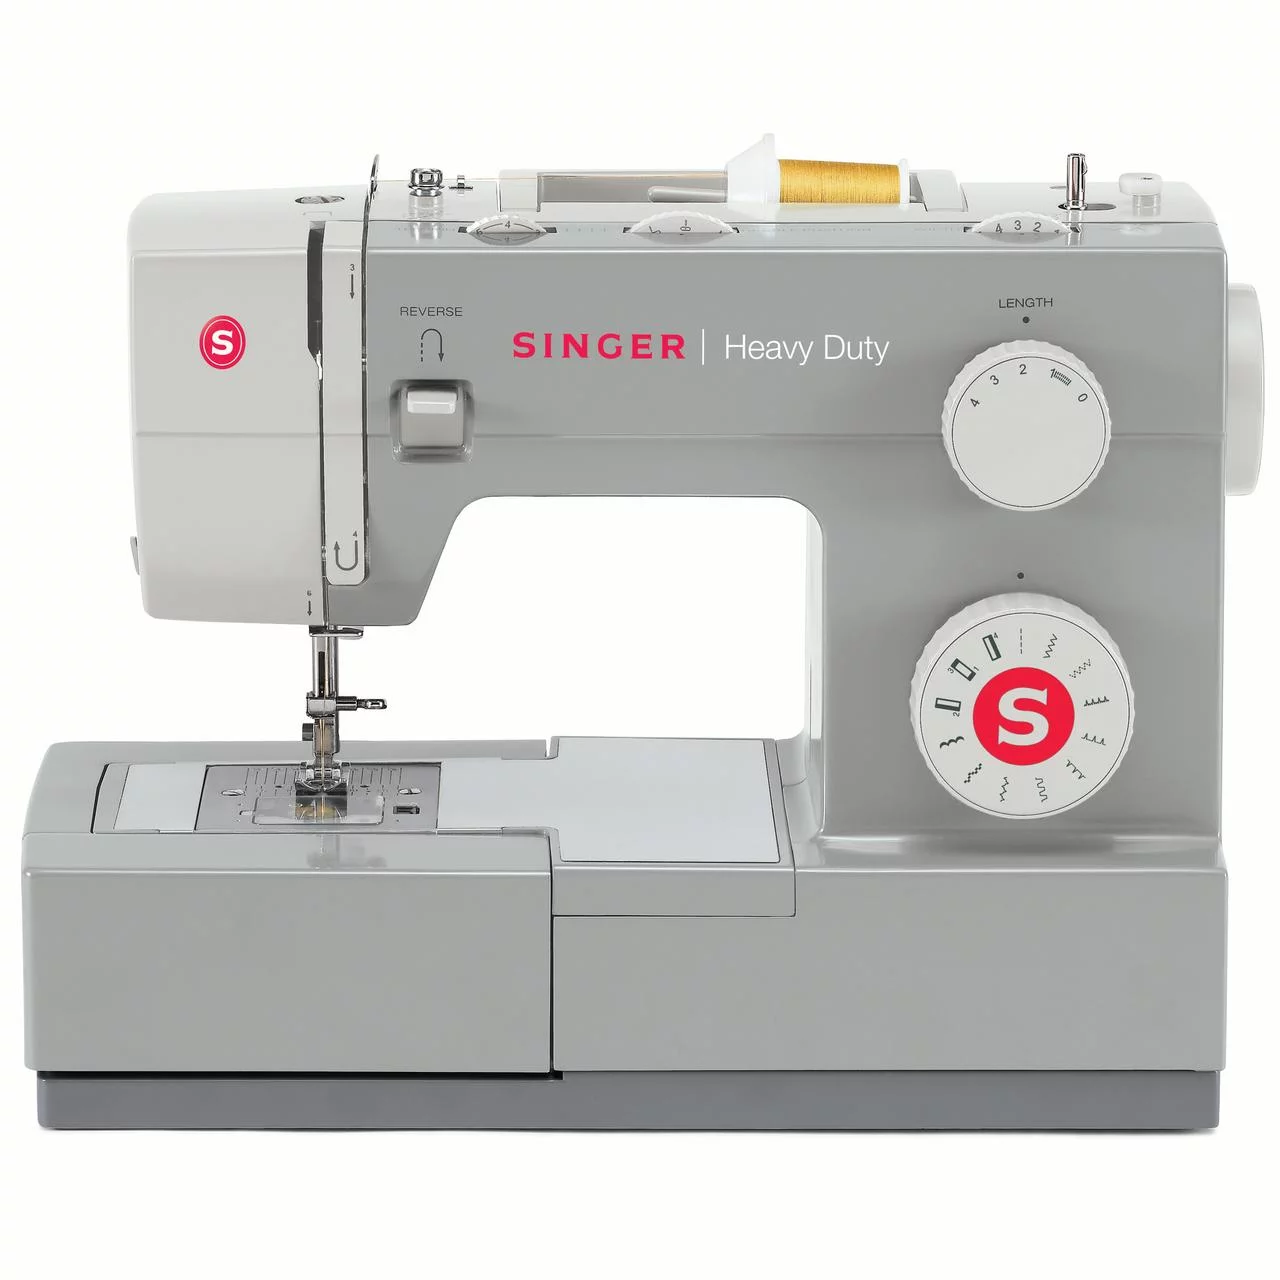 SINGER Heavy Duty 4411 Sewing Machine with 69 Stitch Applications, a Strong Motor & 4-Step Buttonhole